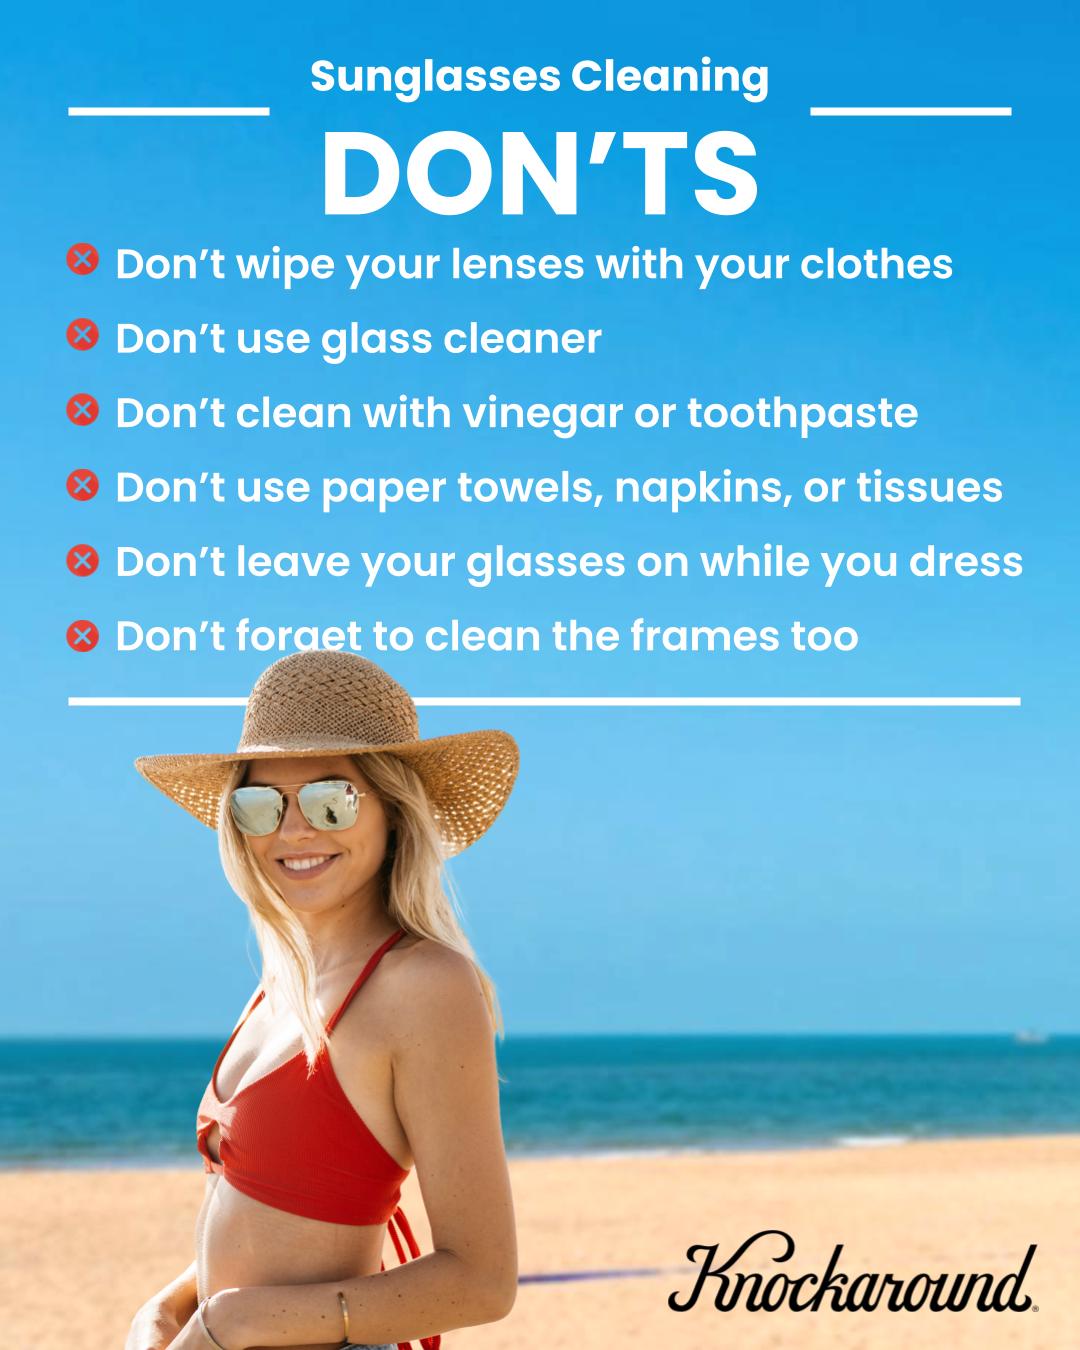 Common Mistakes When Cleaning Sunglasses